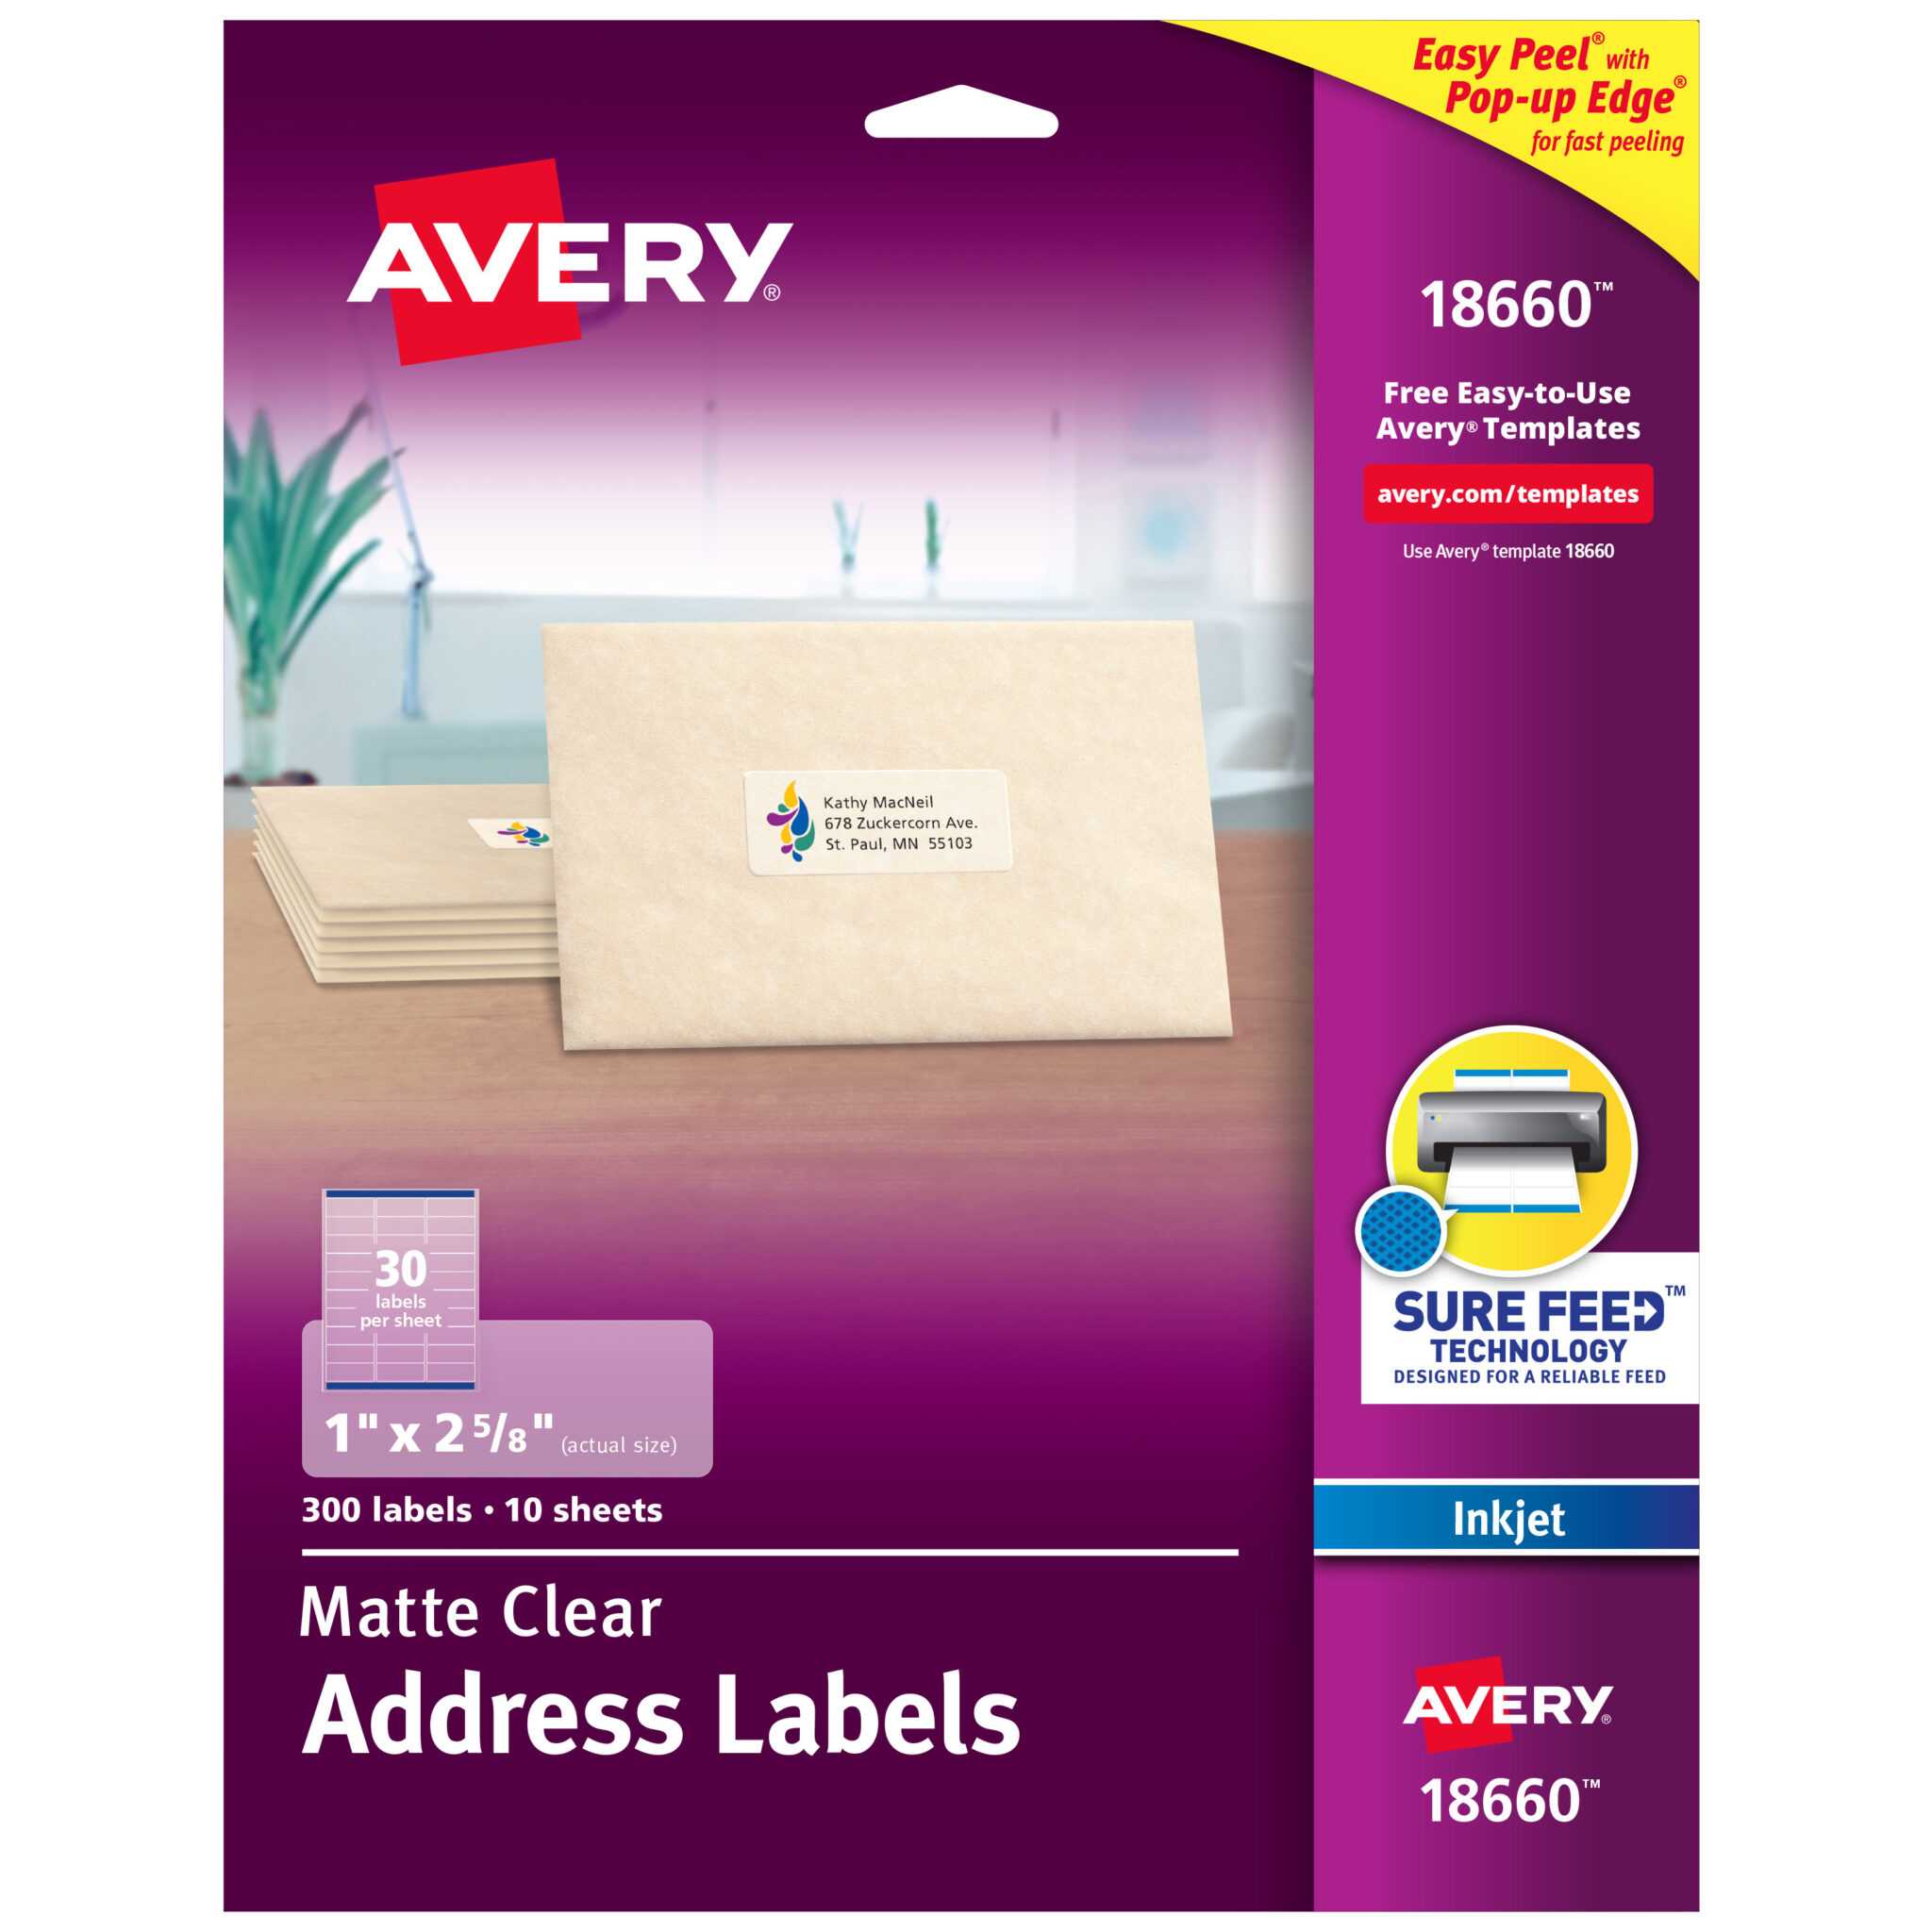 avery-labels-template-5167-falep-midnightpig-co-for-8-labels-per-sheet-template-word-great